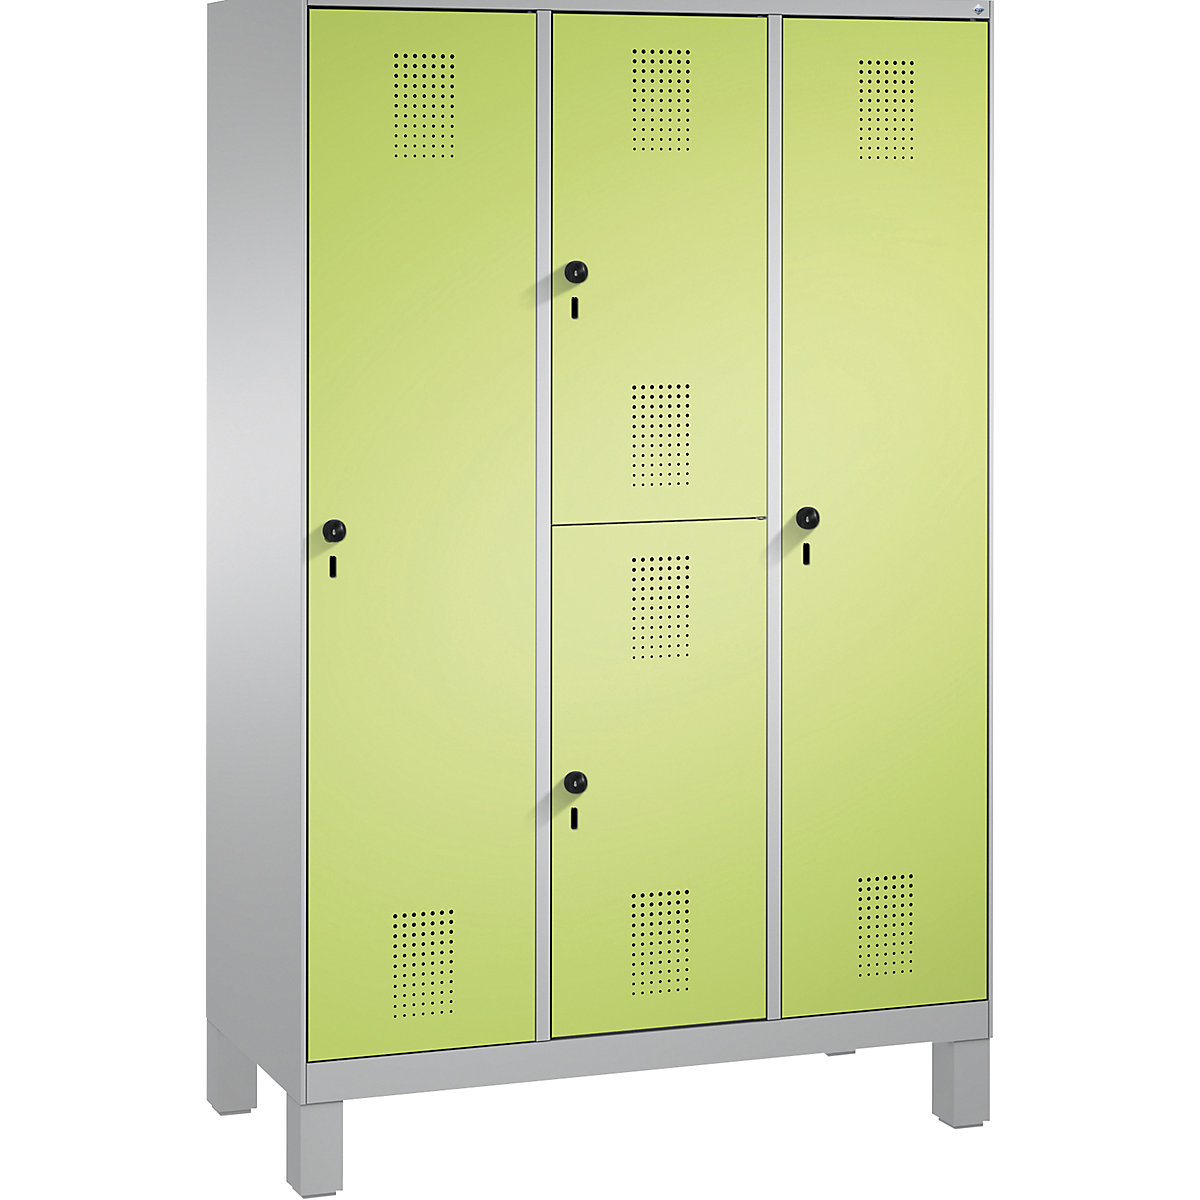 EVOLO combination cupboard, single and double tier – C+P, 3 compartments, 4 doors, compartment width 400 mm, with feet, white aluminium / viridian green